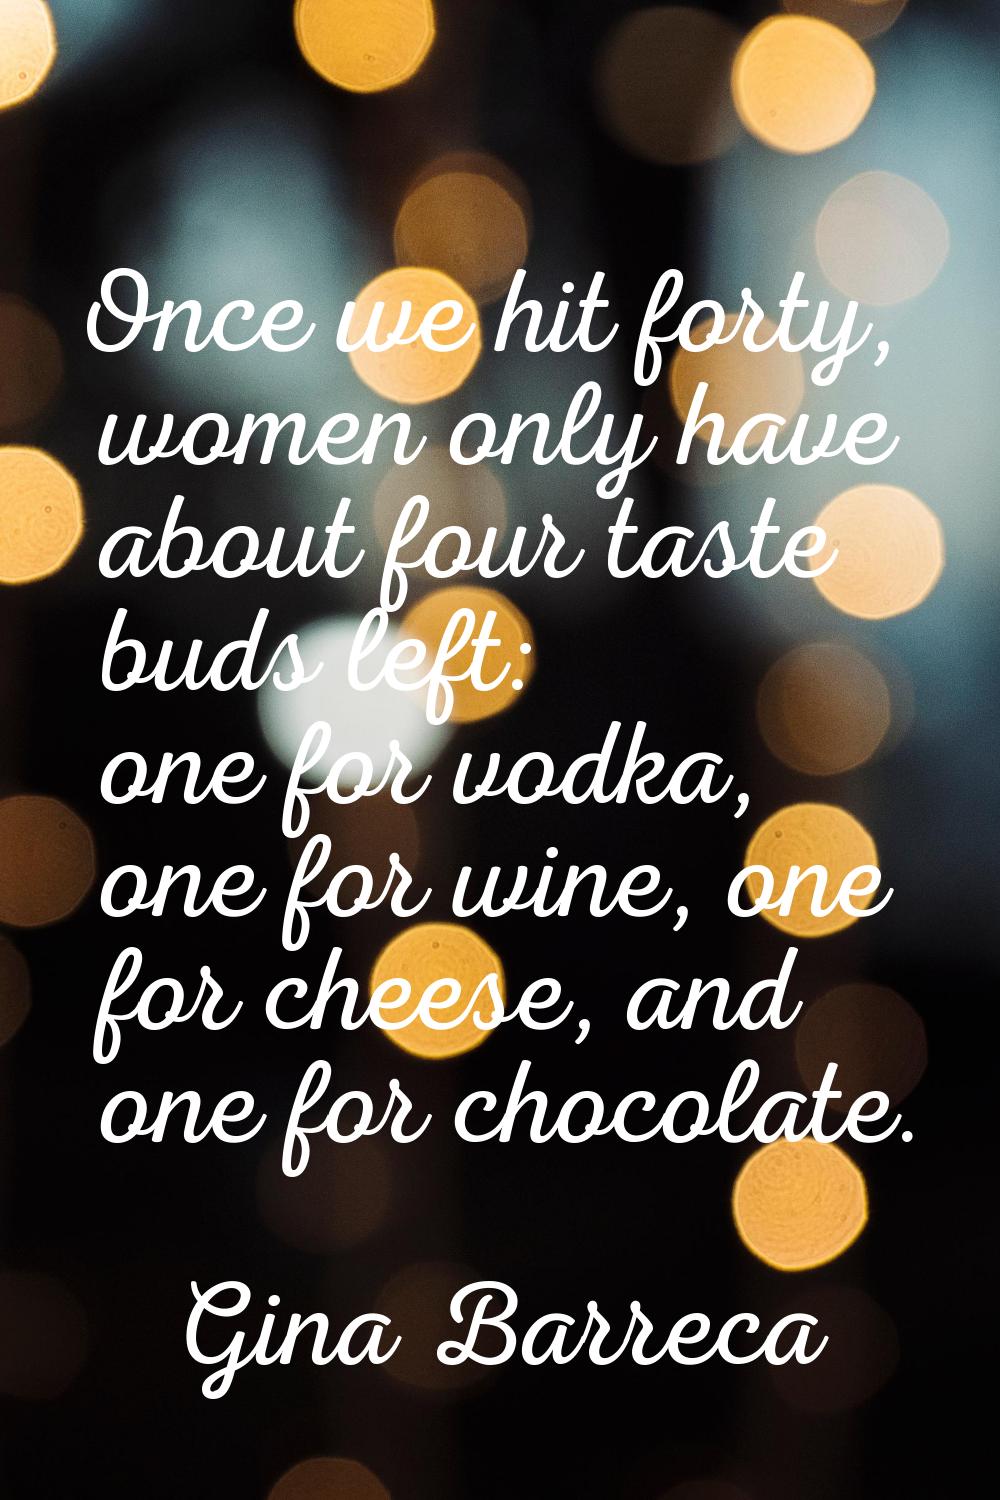 Once we hit forty, women only have about four taste buds left: one for vodka, one for wine, one for